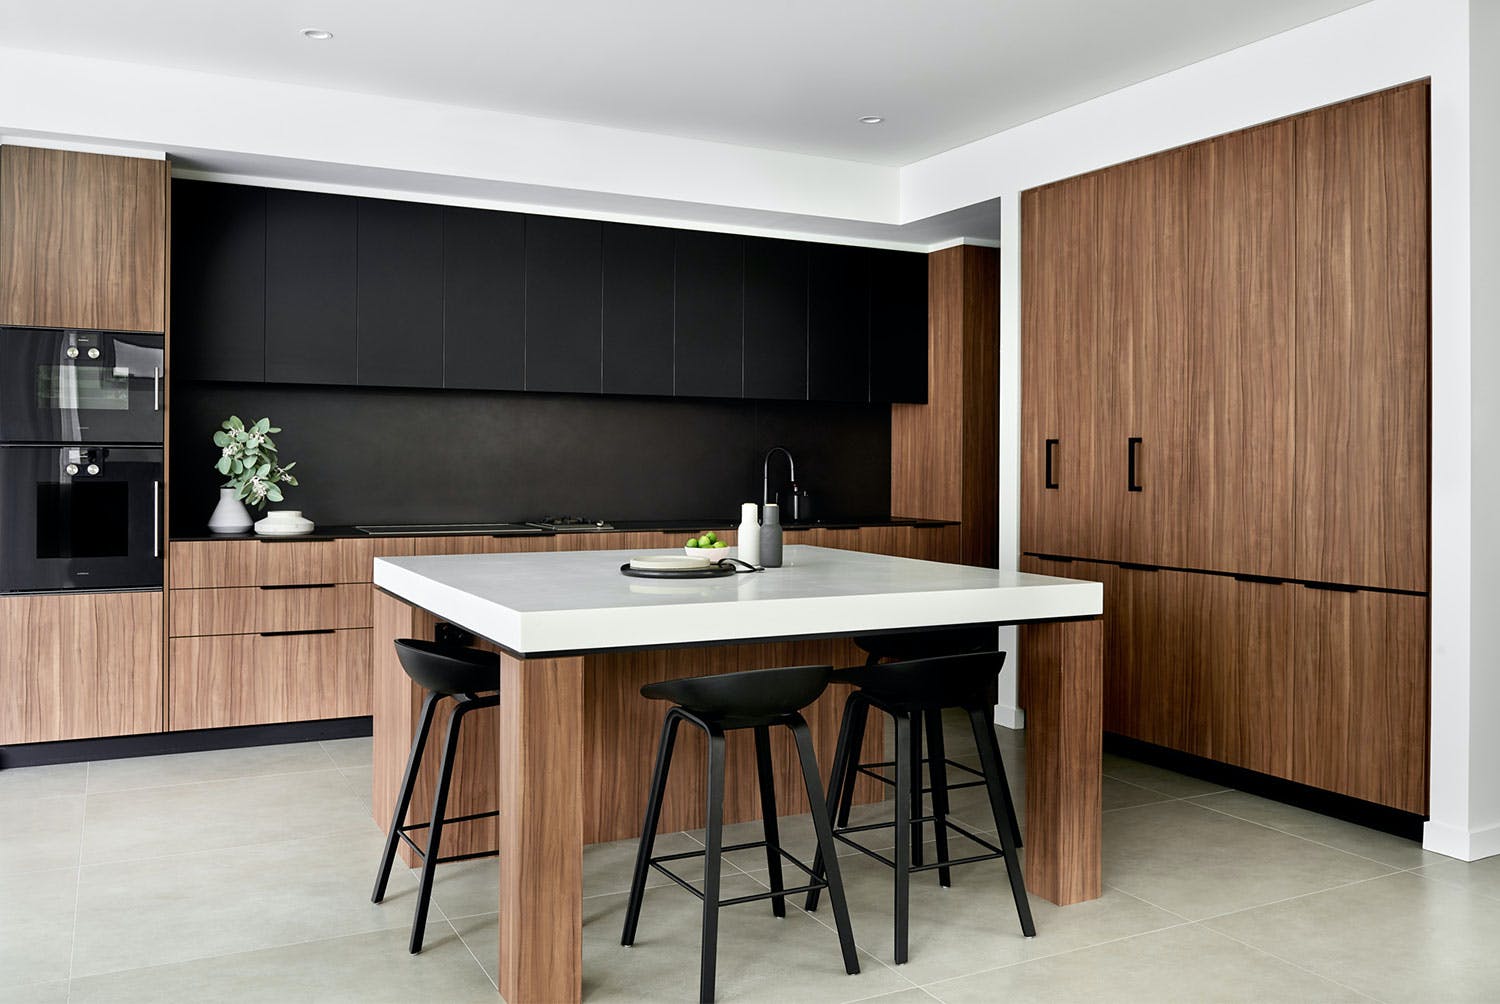 Kitchen by Schemes and Spaces